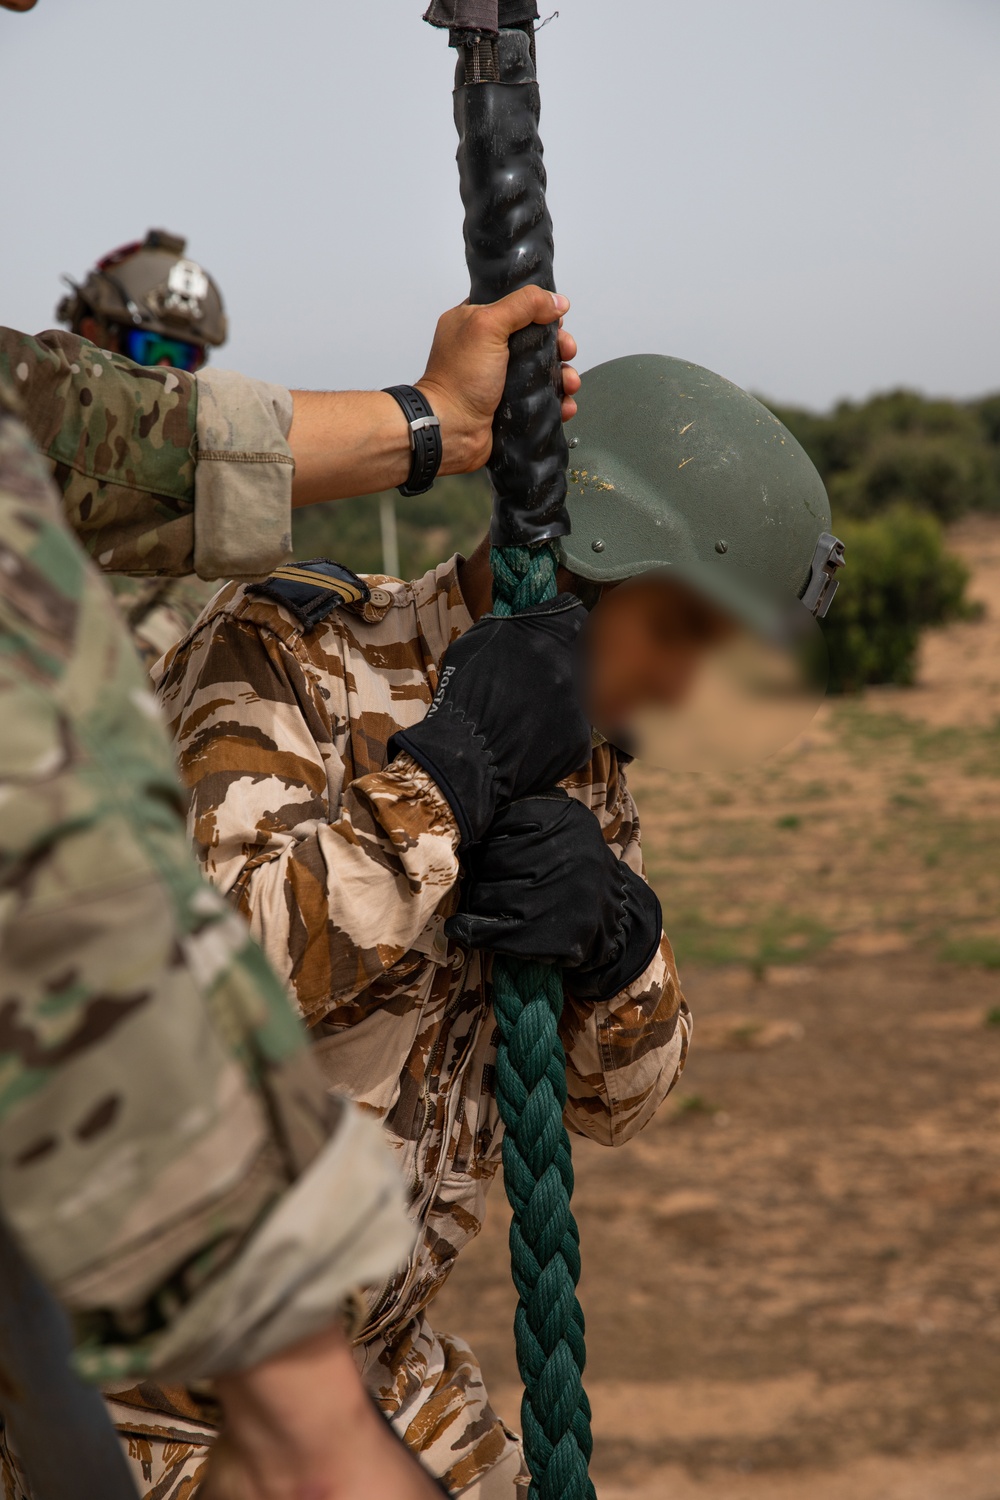 DVIDS - Images - Moroccan and 19th Special Forces Group Fast Rope Training  [Image 9 of 10]